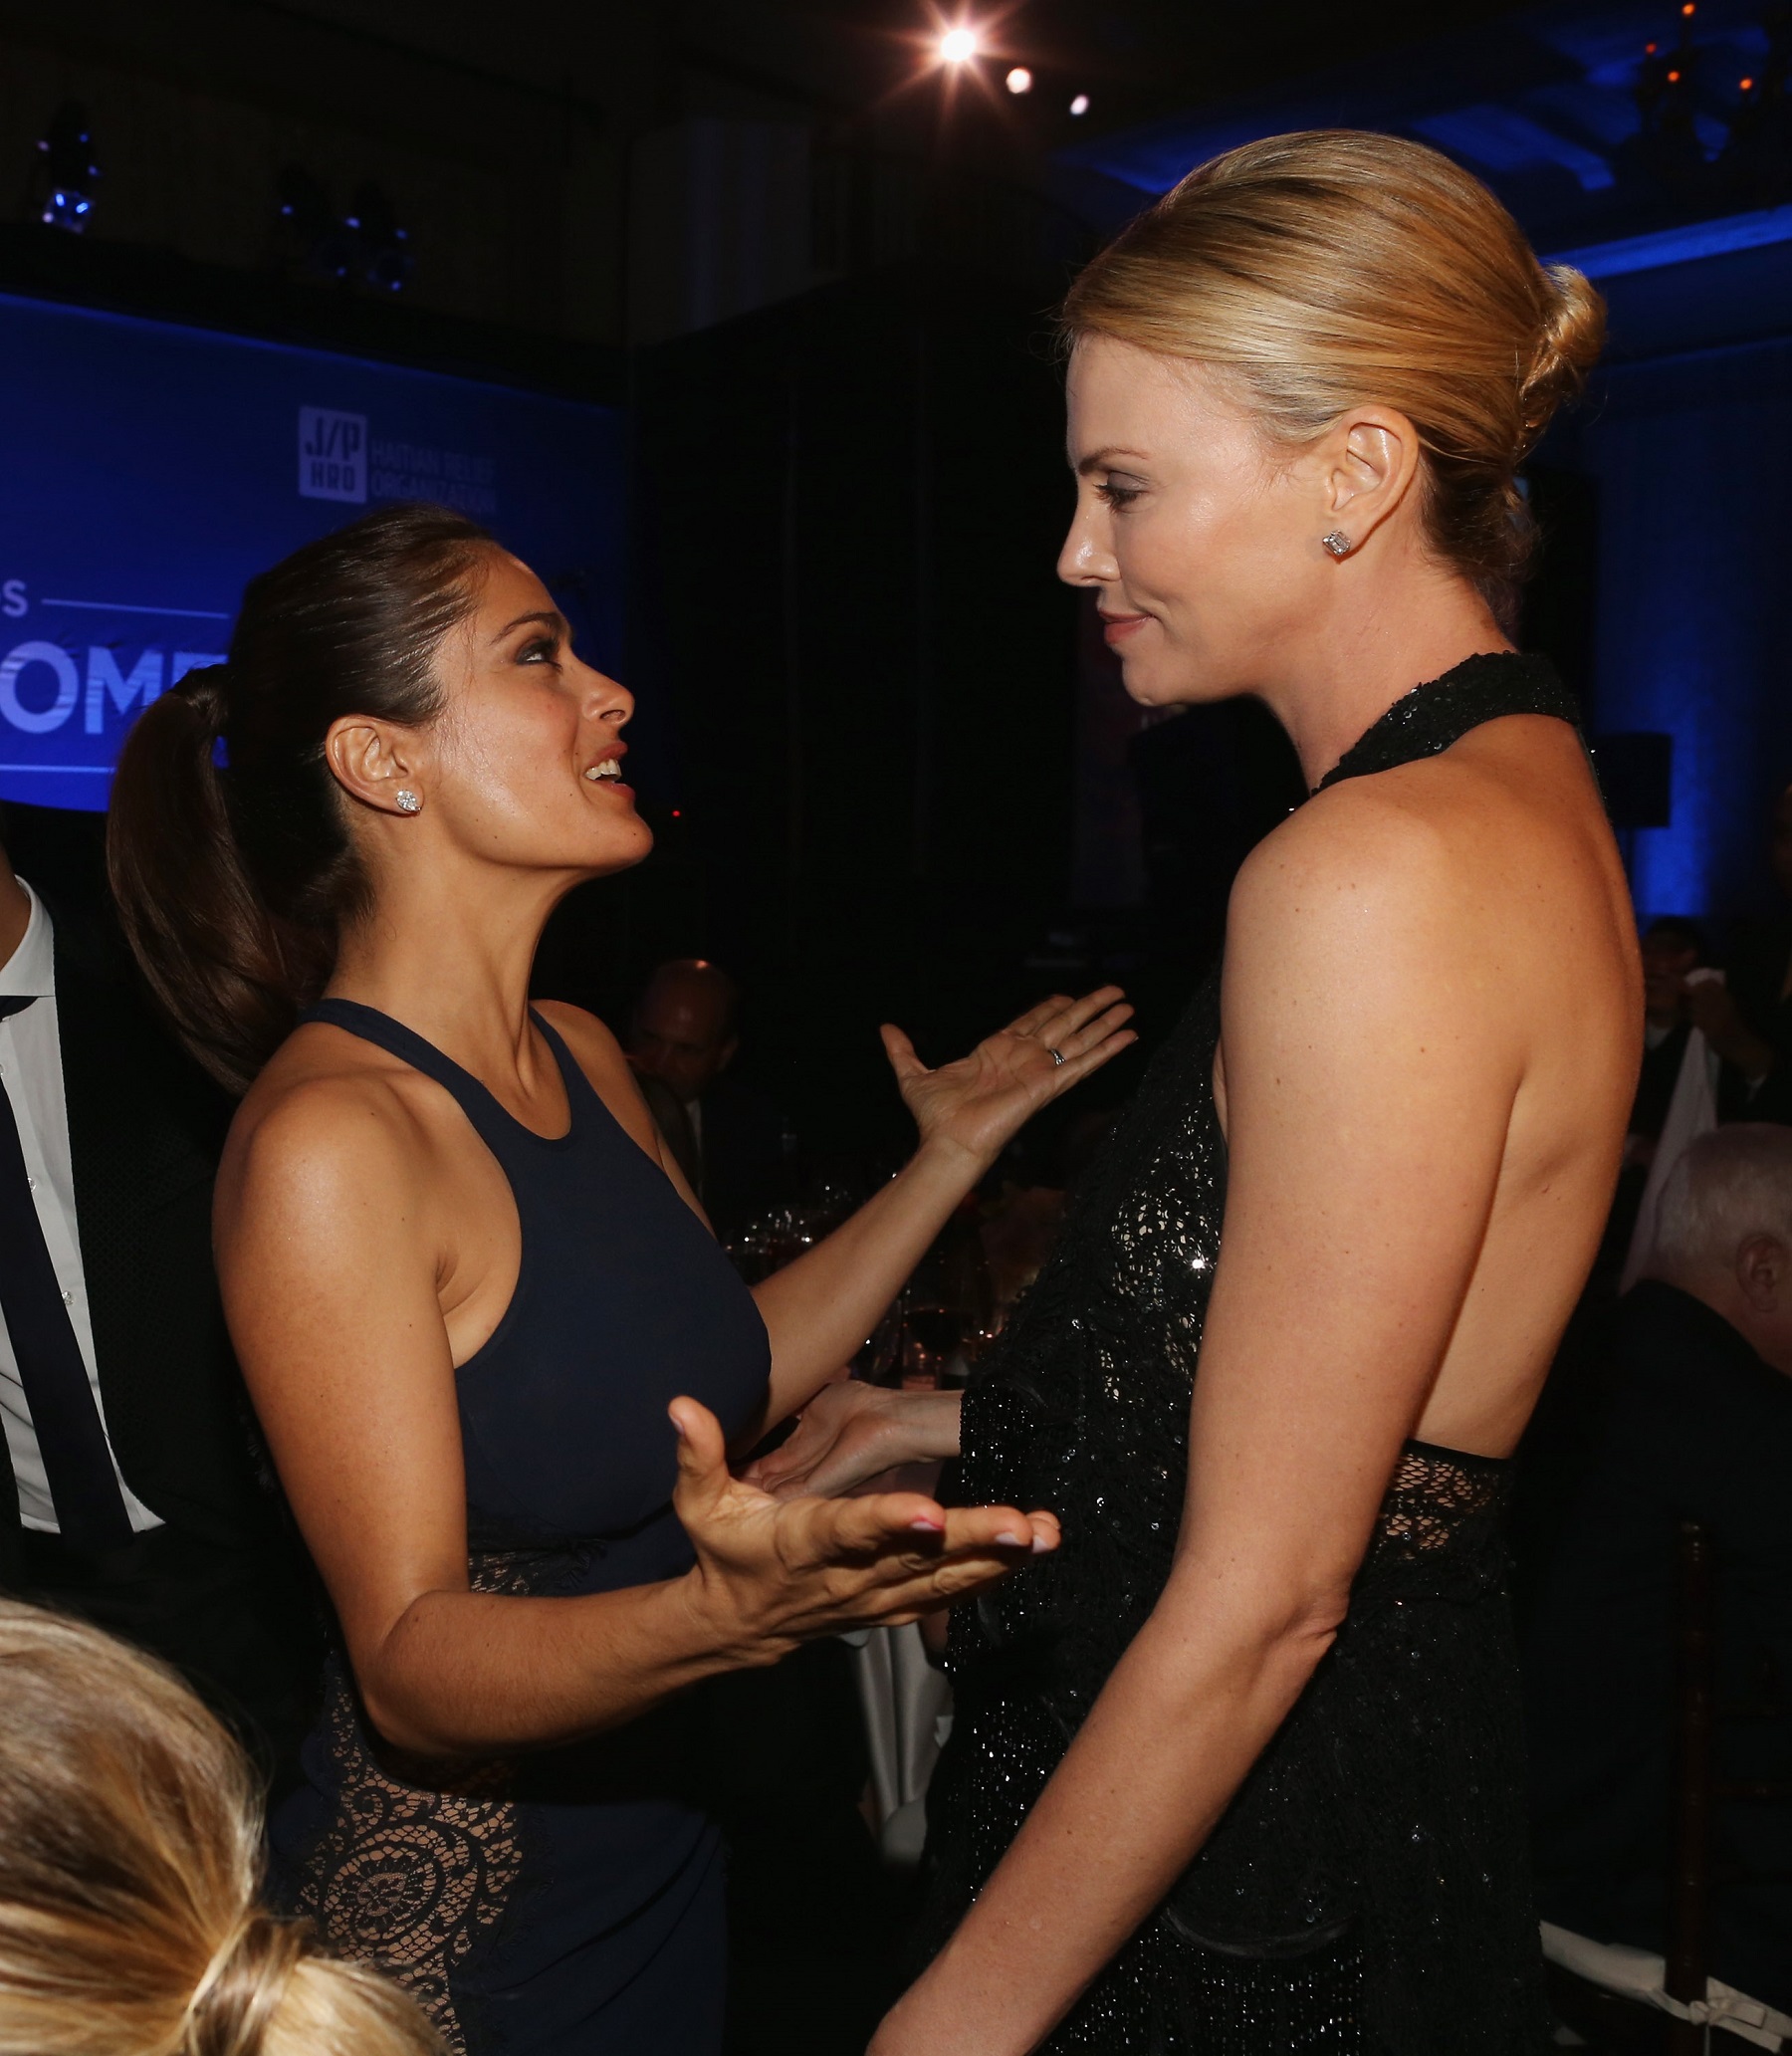 LOS ANGELES, CA - JANUARY 10:  Salma Hayek and Charlize Theron attend the 4th Annual Sean Penn & Friends HELP HAITI HOME Gala Benefiting J/P Haitian Relief Organization on January 10, 2015 in Los Angeles, California.  (Photo by Christopher Polk/Getty Images for J/P Haitian Relief Organization)